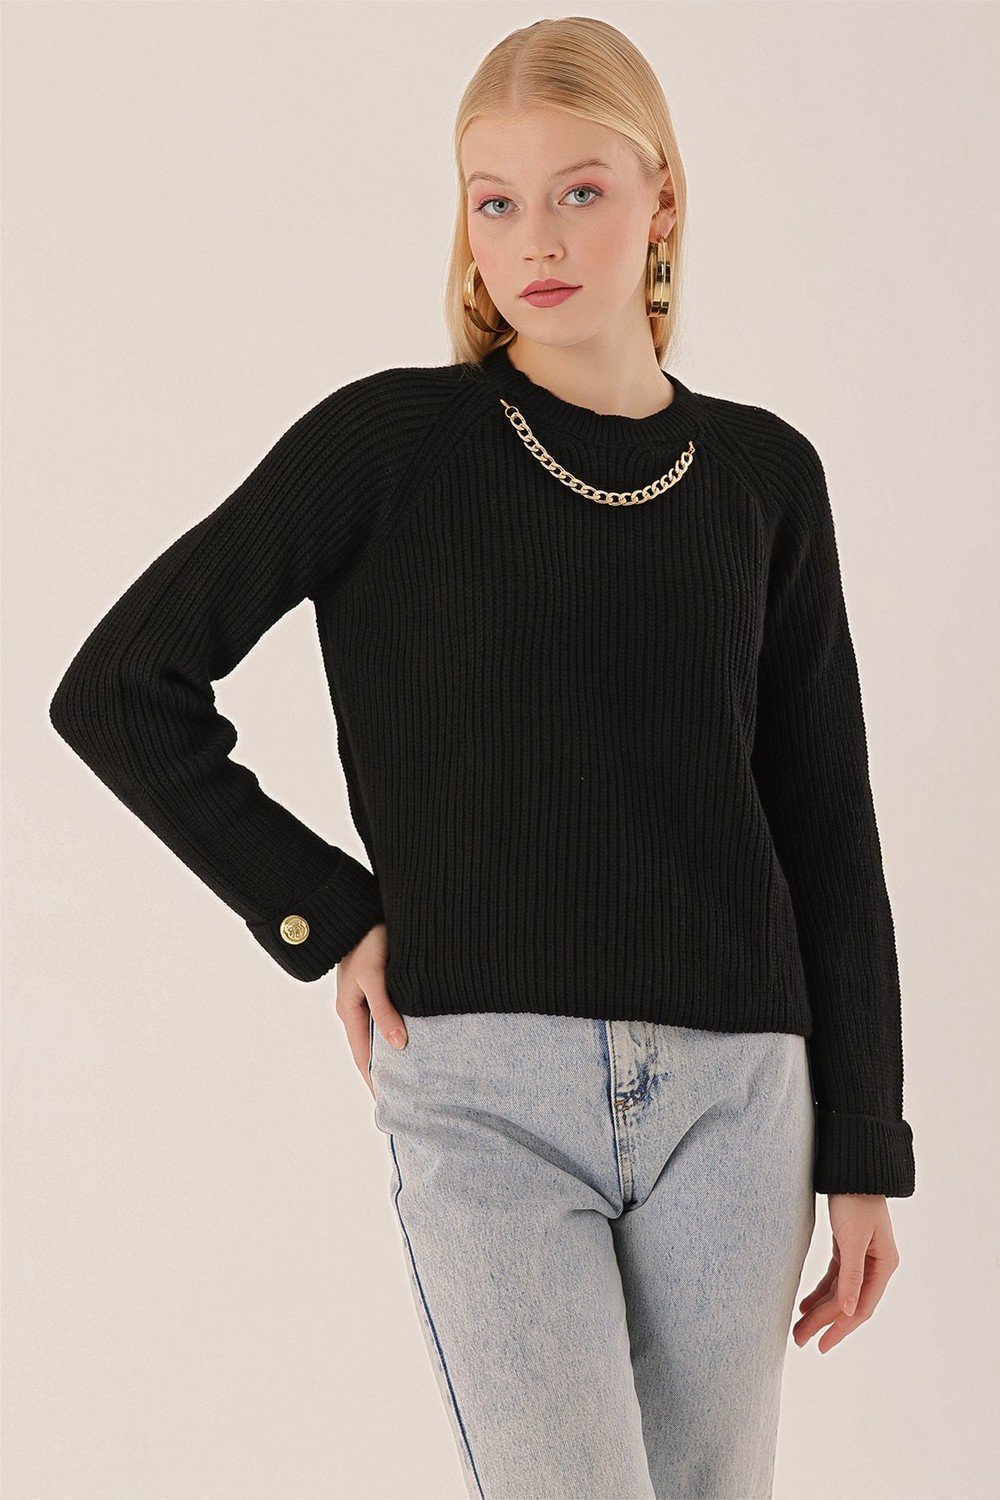 HAKKE Knit sweater with a button-down collar with chain detail.